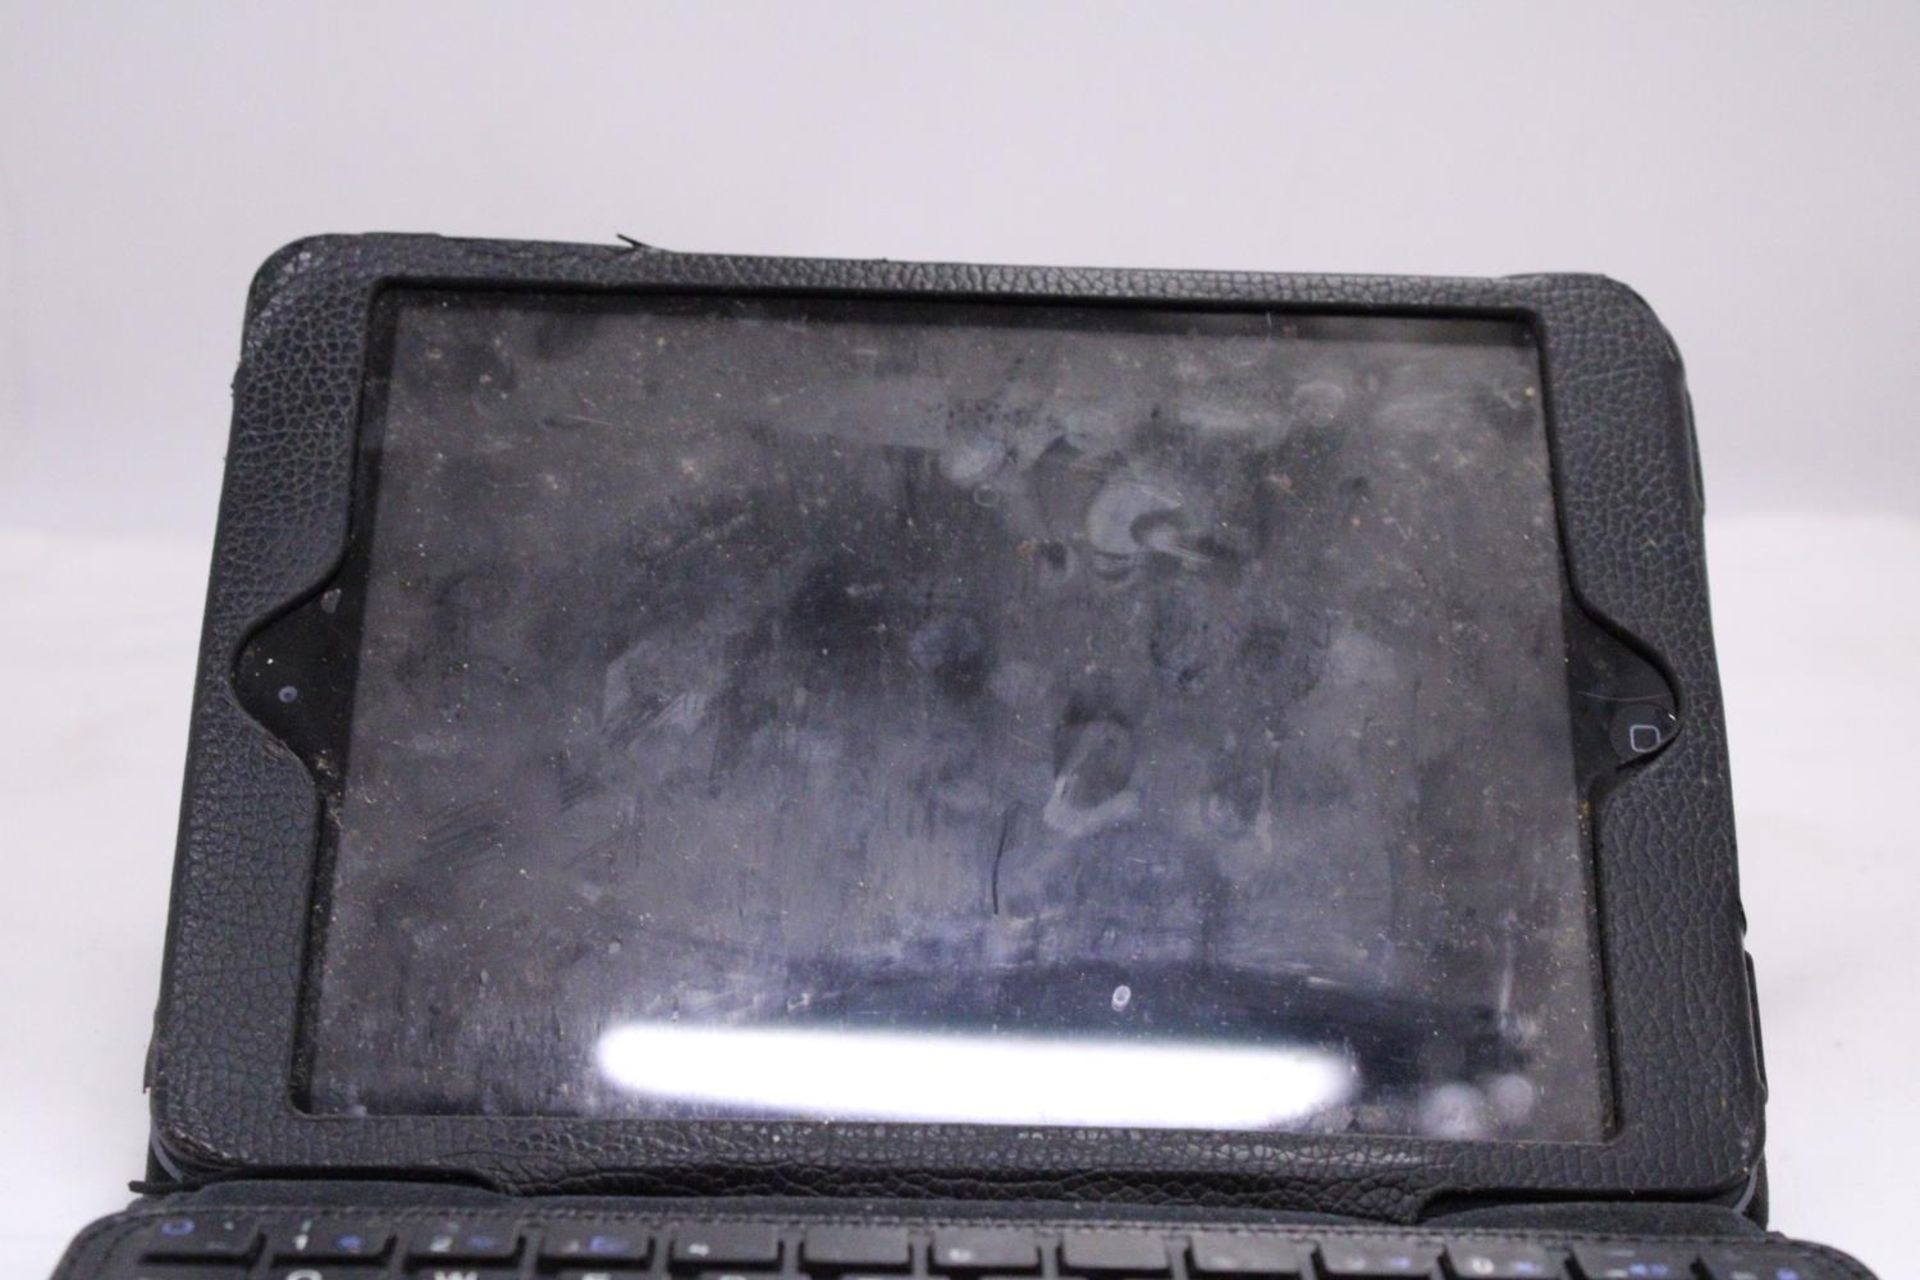 A CASED TABLET WITH KEYBOARD - NO WARRANTY GIVEN - Image 2 of 4